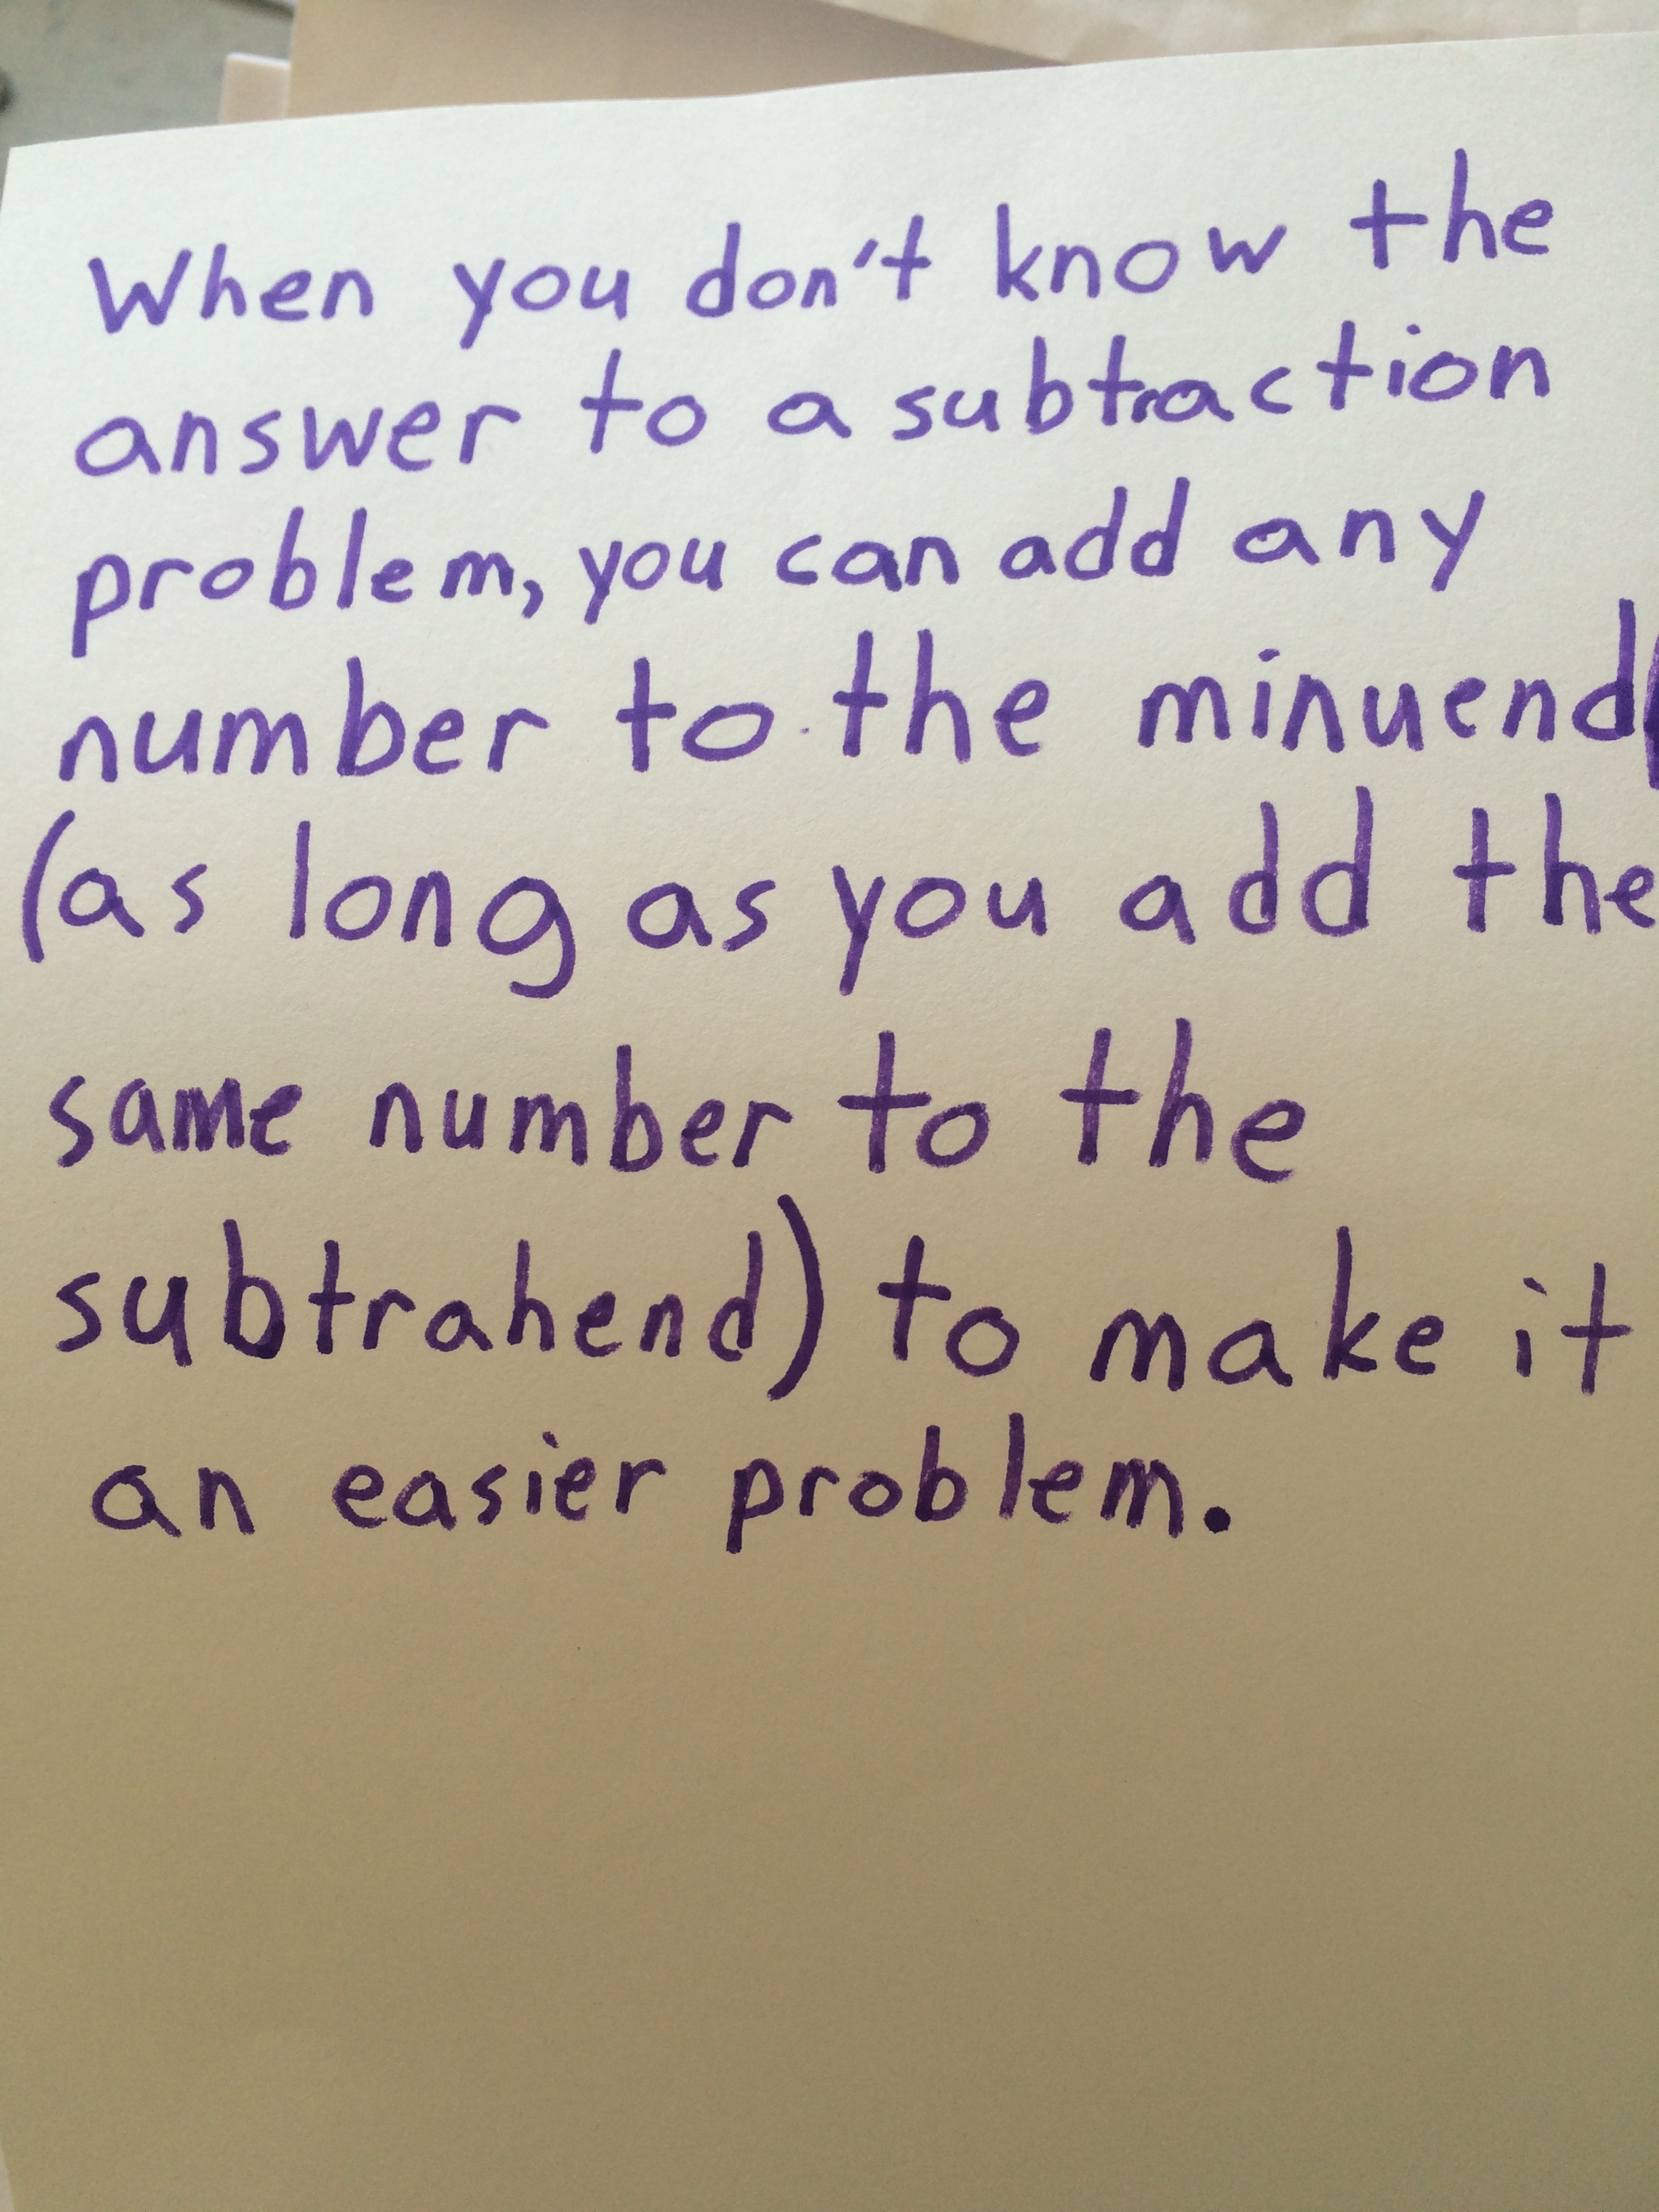 The Meaning of Subtraction